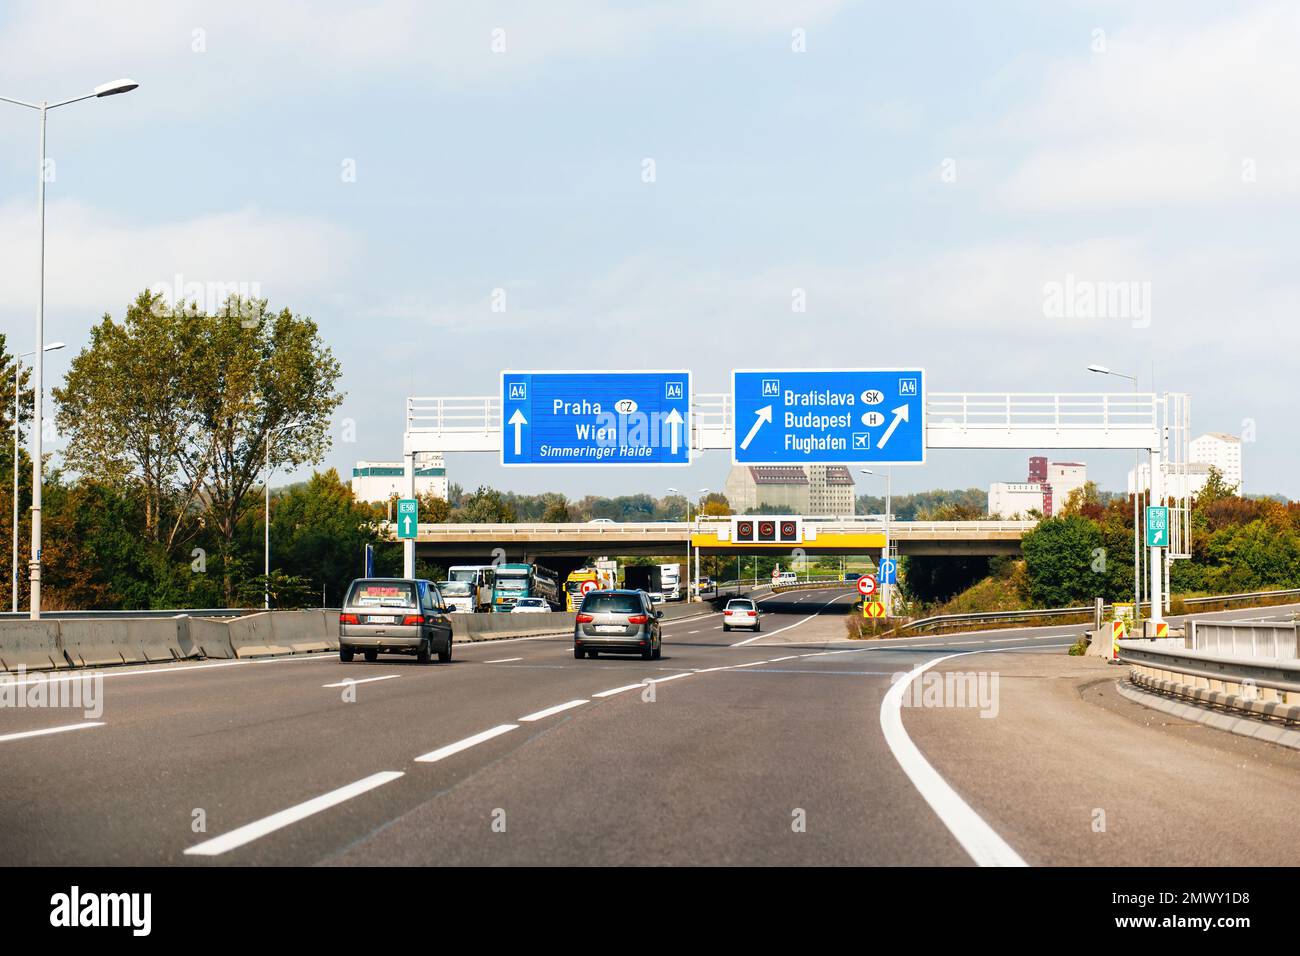 Austria - Sep 30, 2014: View from the highway at the blue direction signs  above with Praha,